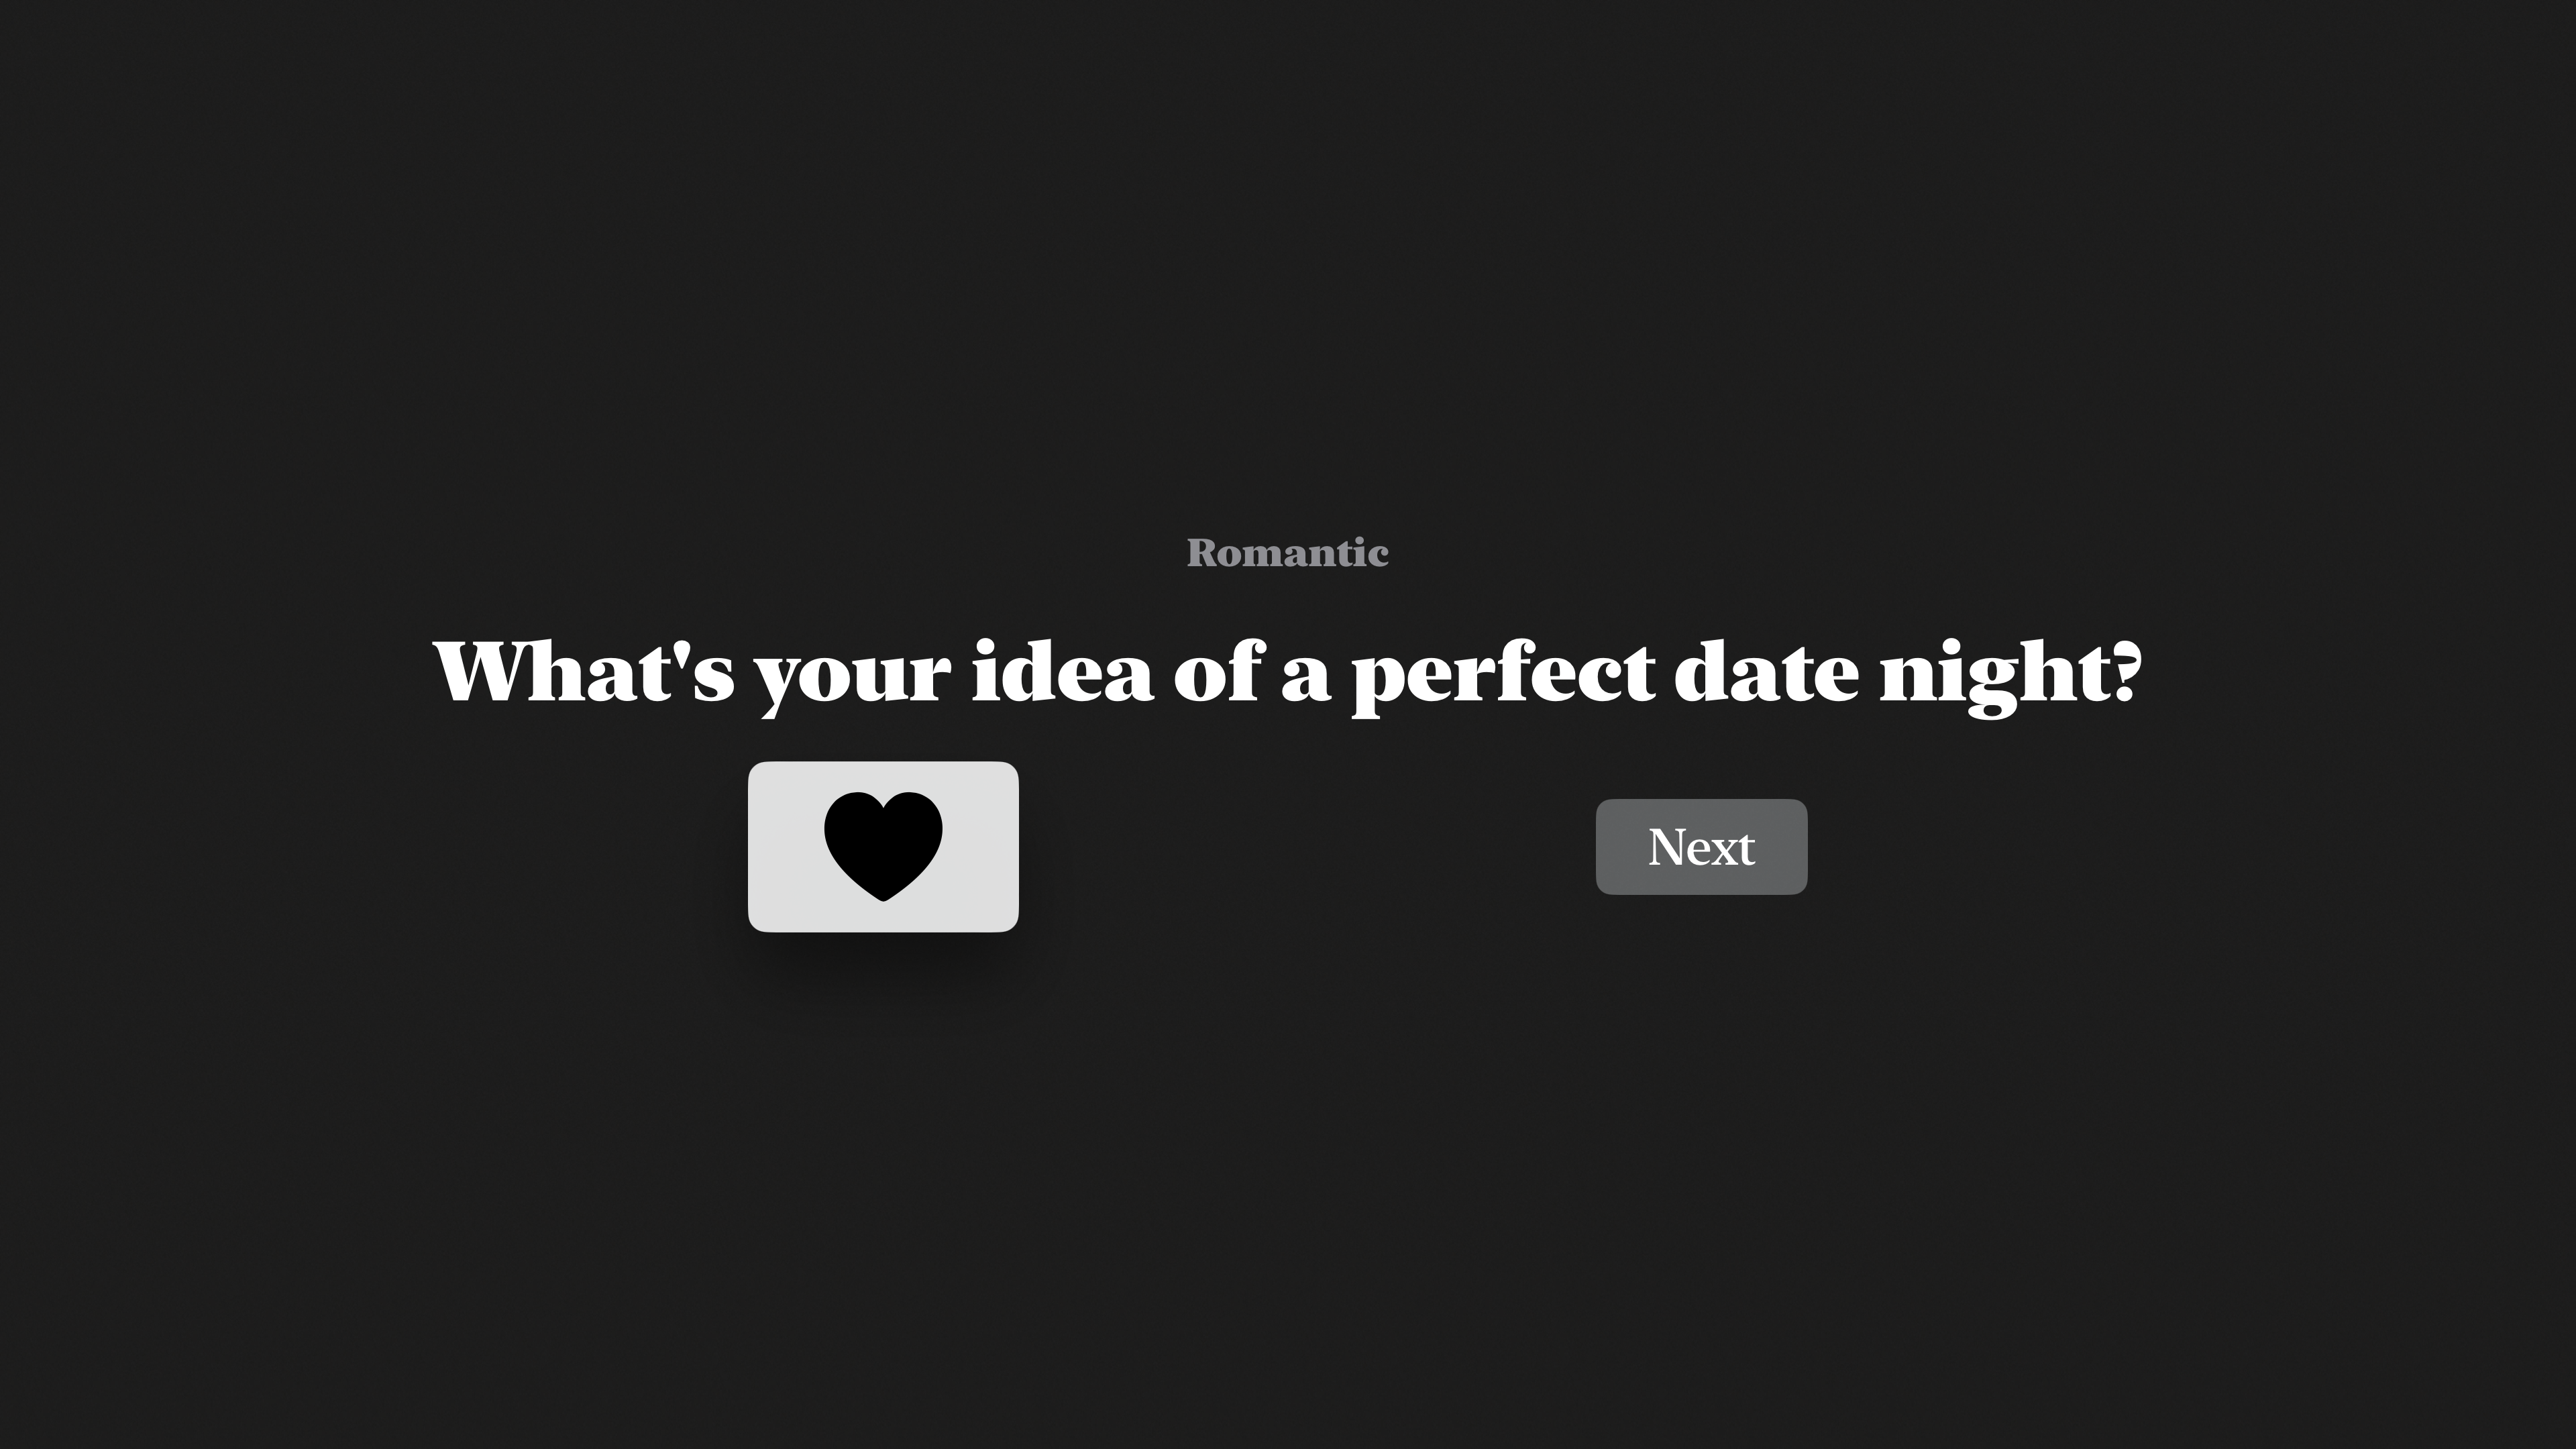 "What's your idea of a perfect date night?" question from Audracity